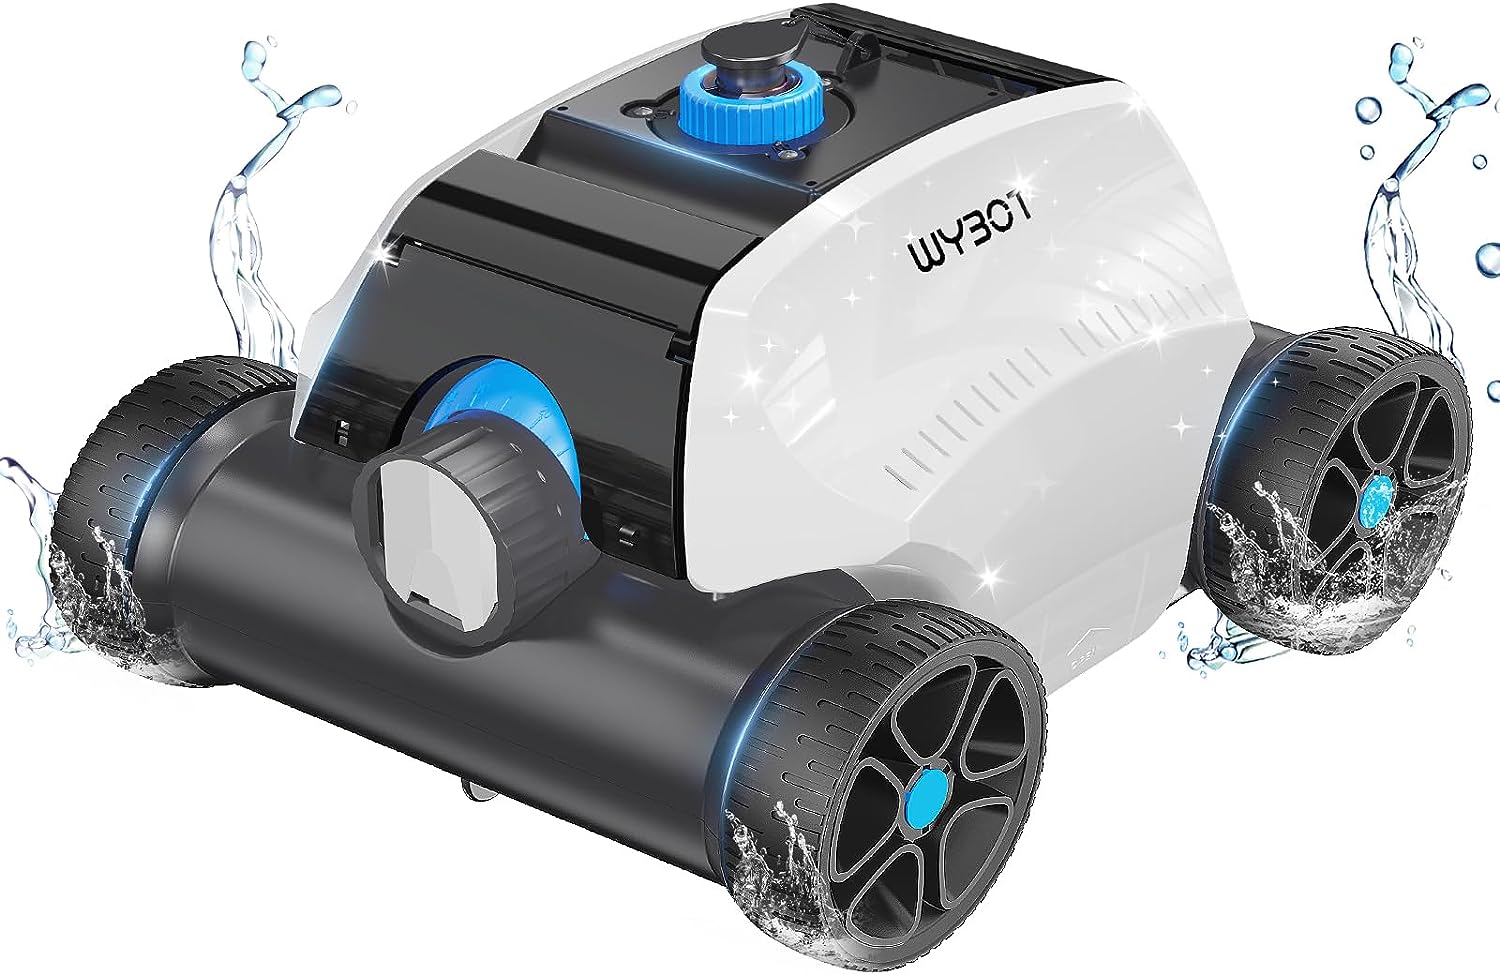 WYBOT Robotic Pool Cleaner Review